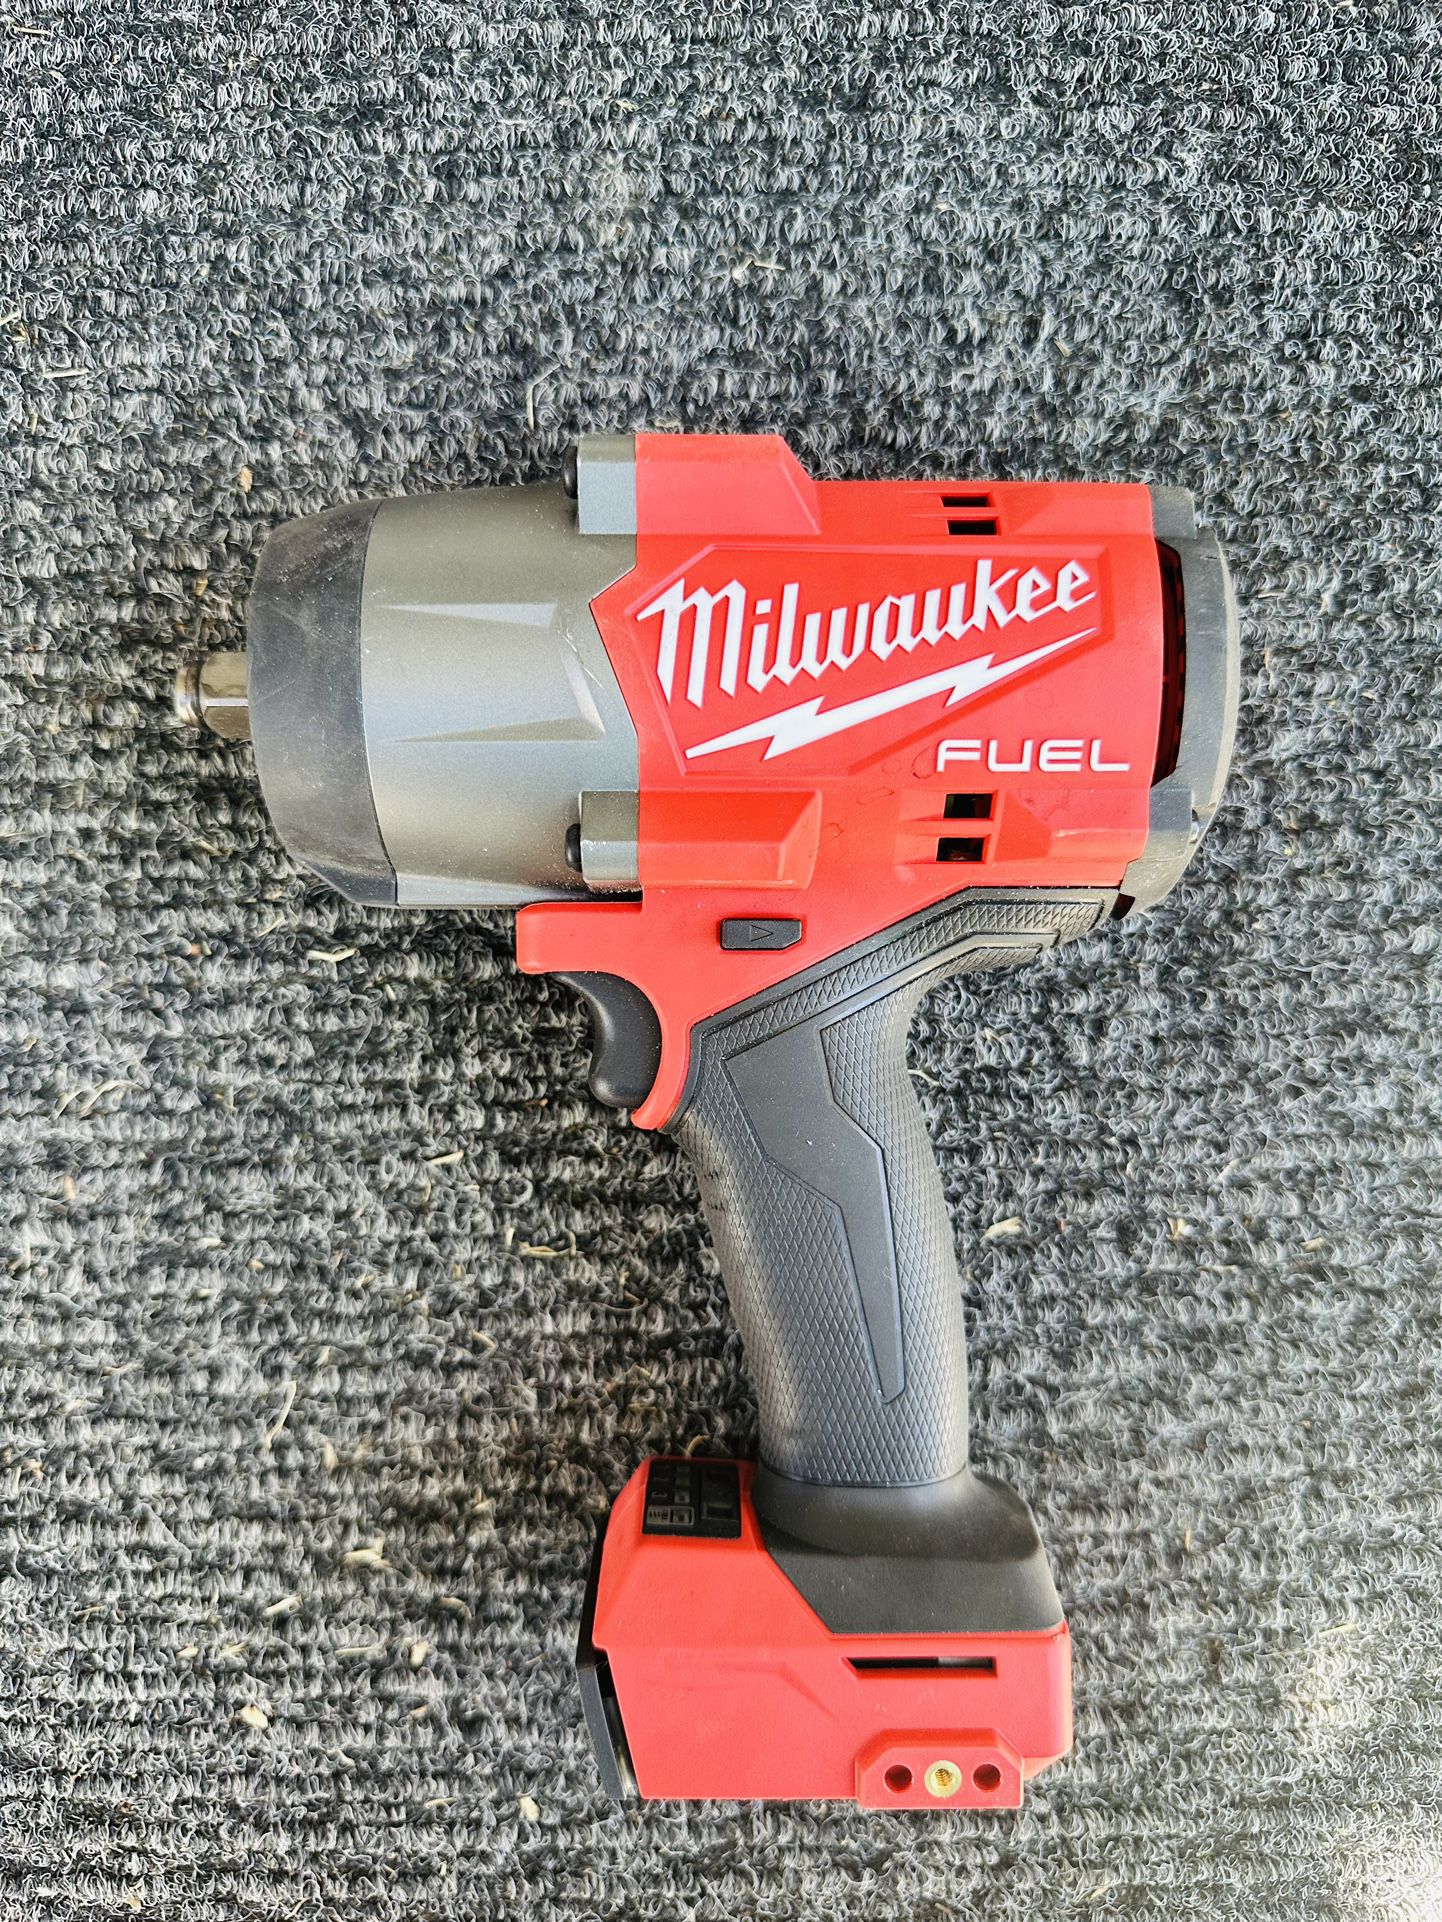 MILWAUKEE M18V FUEL Brushless Cordless 1/2” Square-Ring Impact Wrench w/ Friction Ring (TOOL ONLY/SOLO LA HERRAMIENTA)